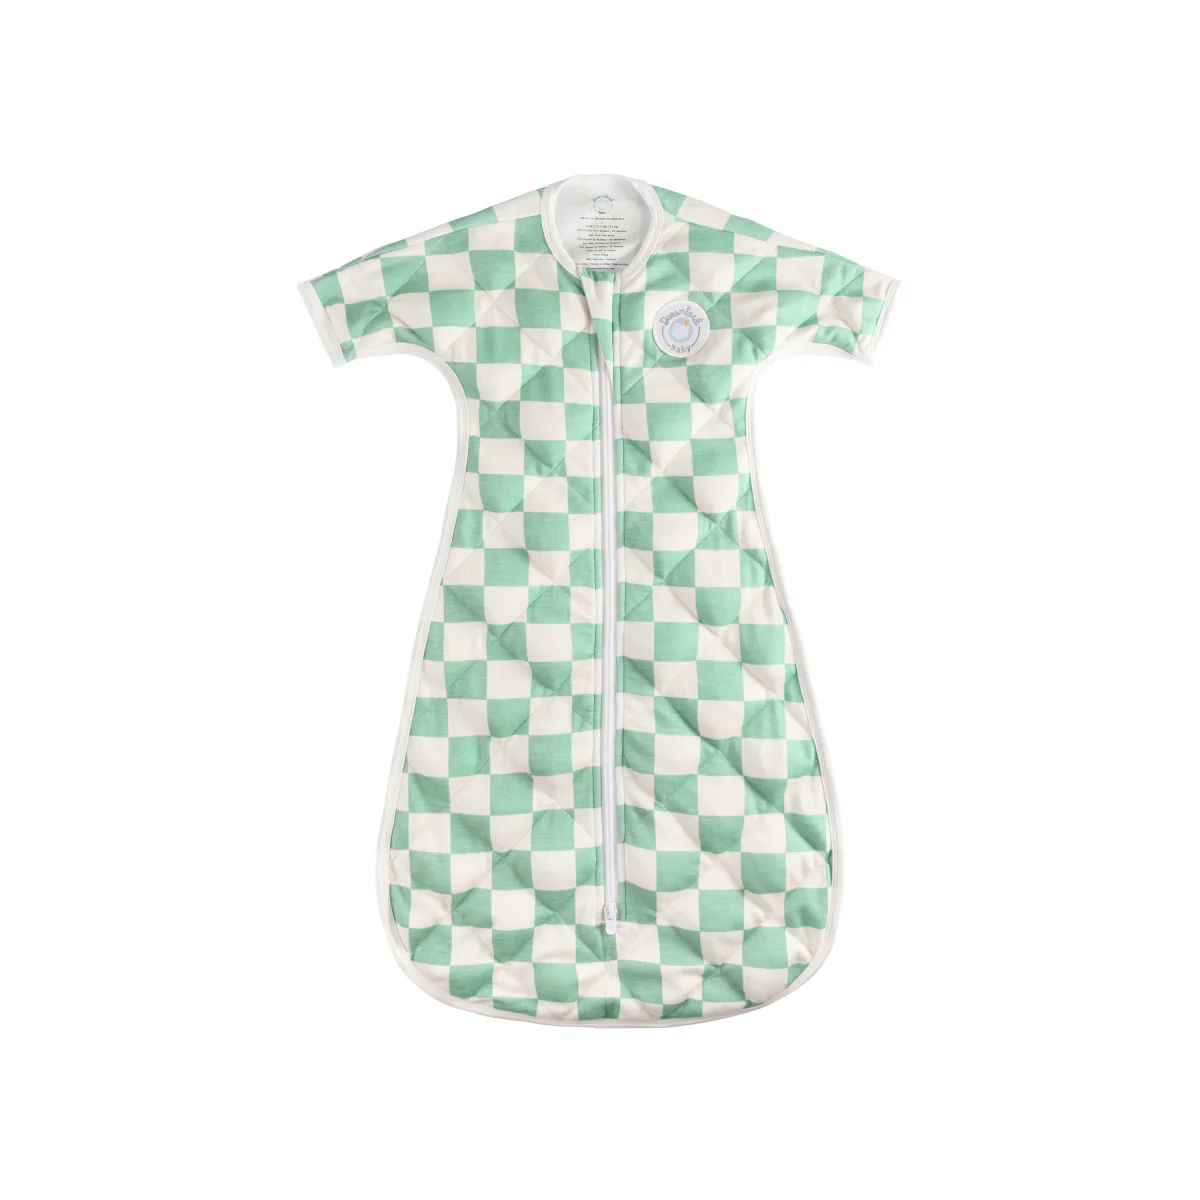 Dream Weighted Transition Swaddle | Dreamland Baby